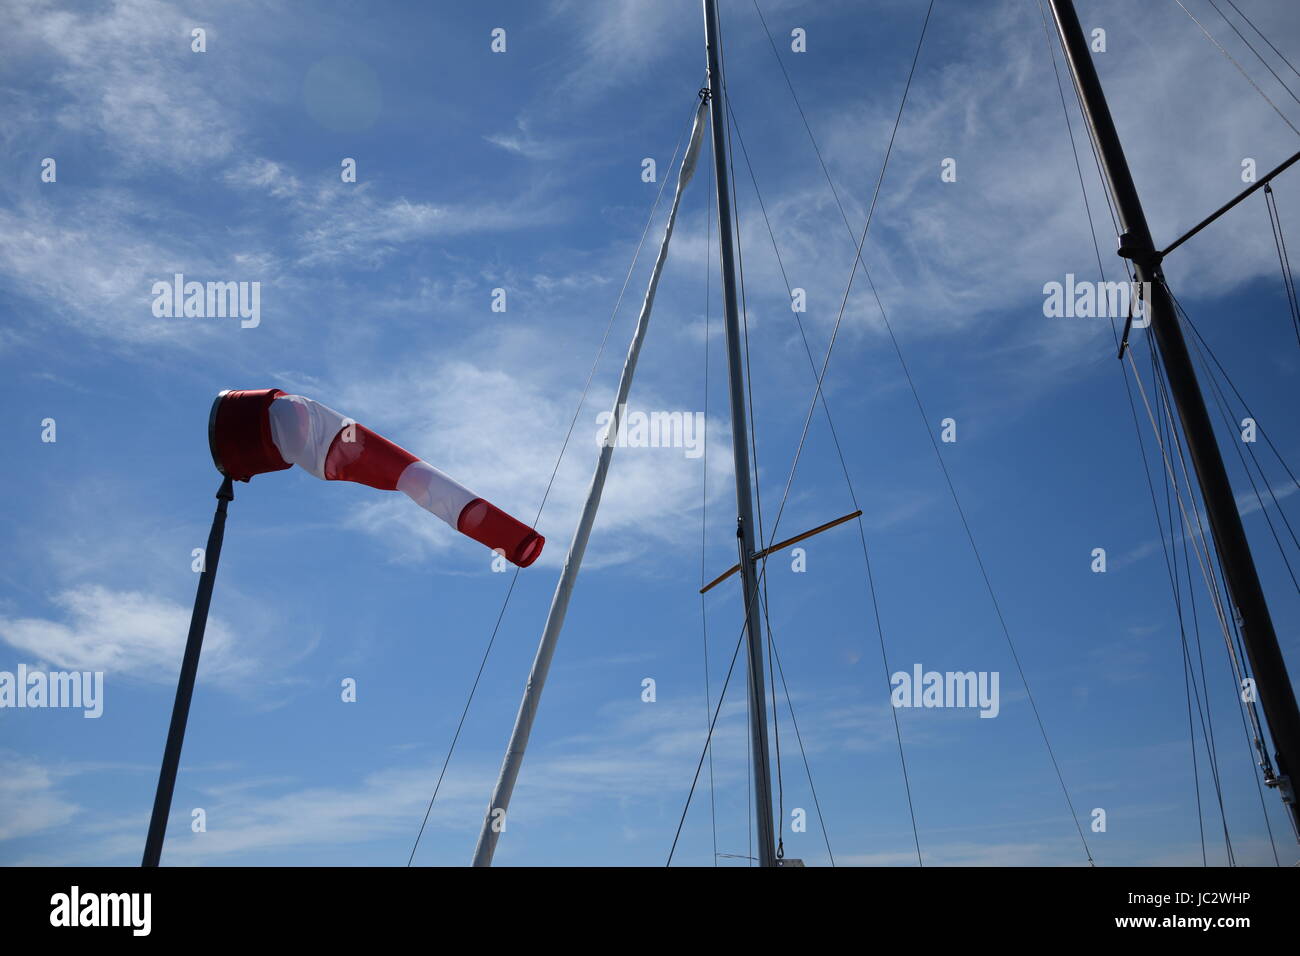 Windsock and yacht masts against blue sky with white clouds Stock Photo